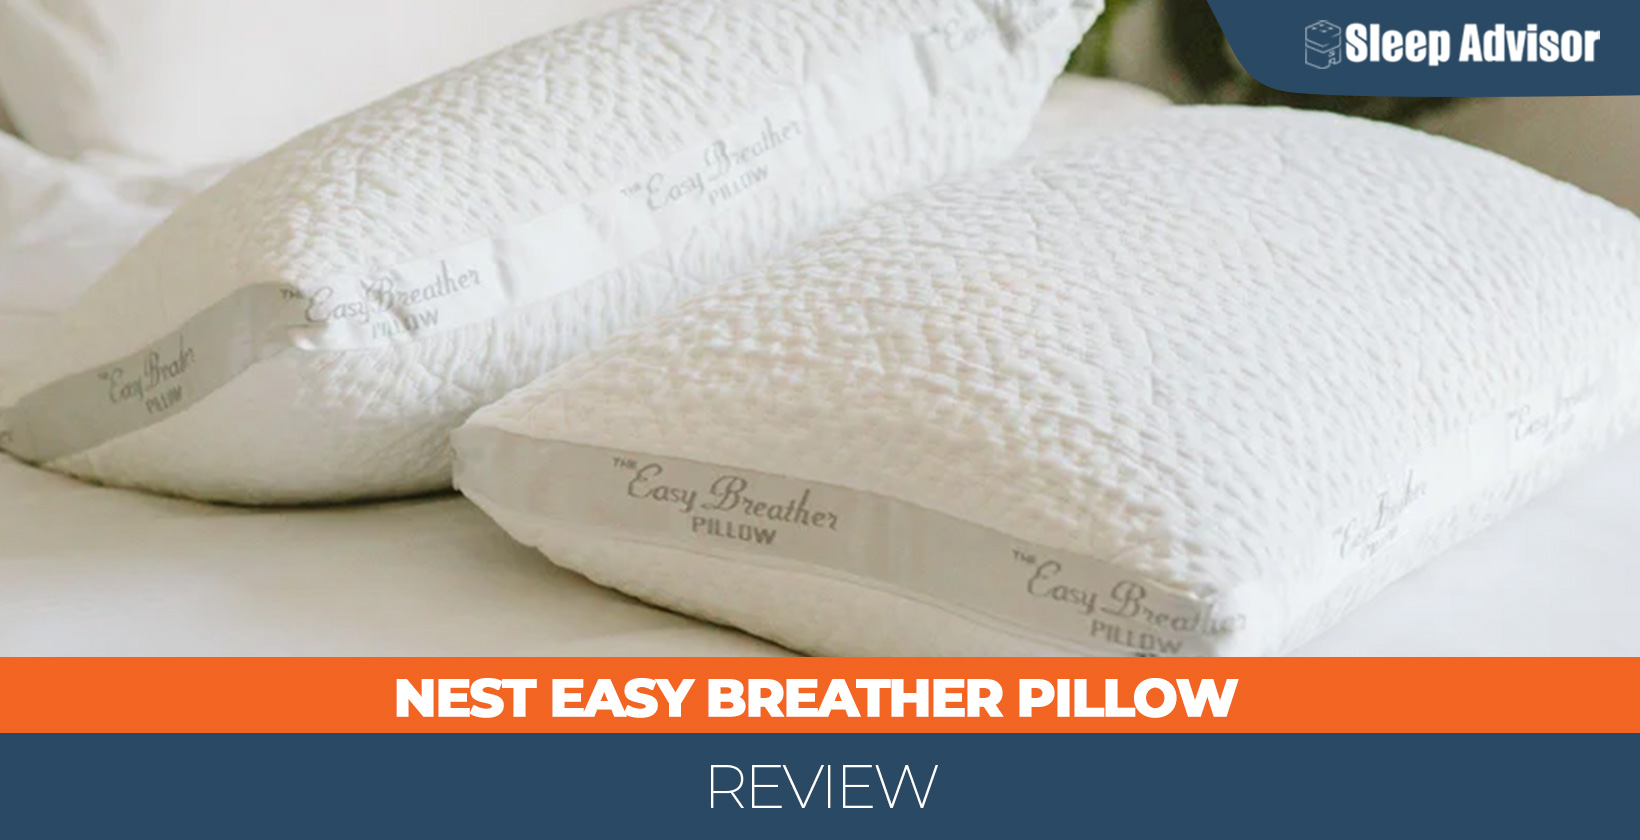 Our in depth overview of the Nest Easy Breather Pillow